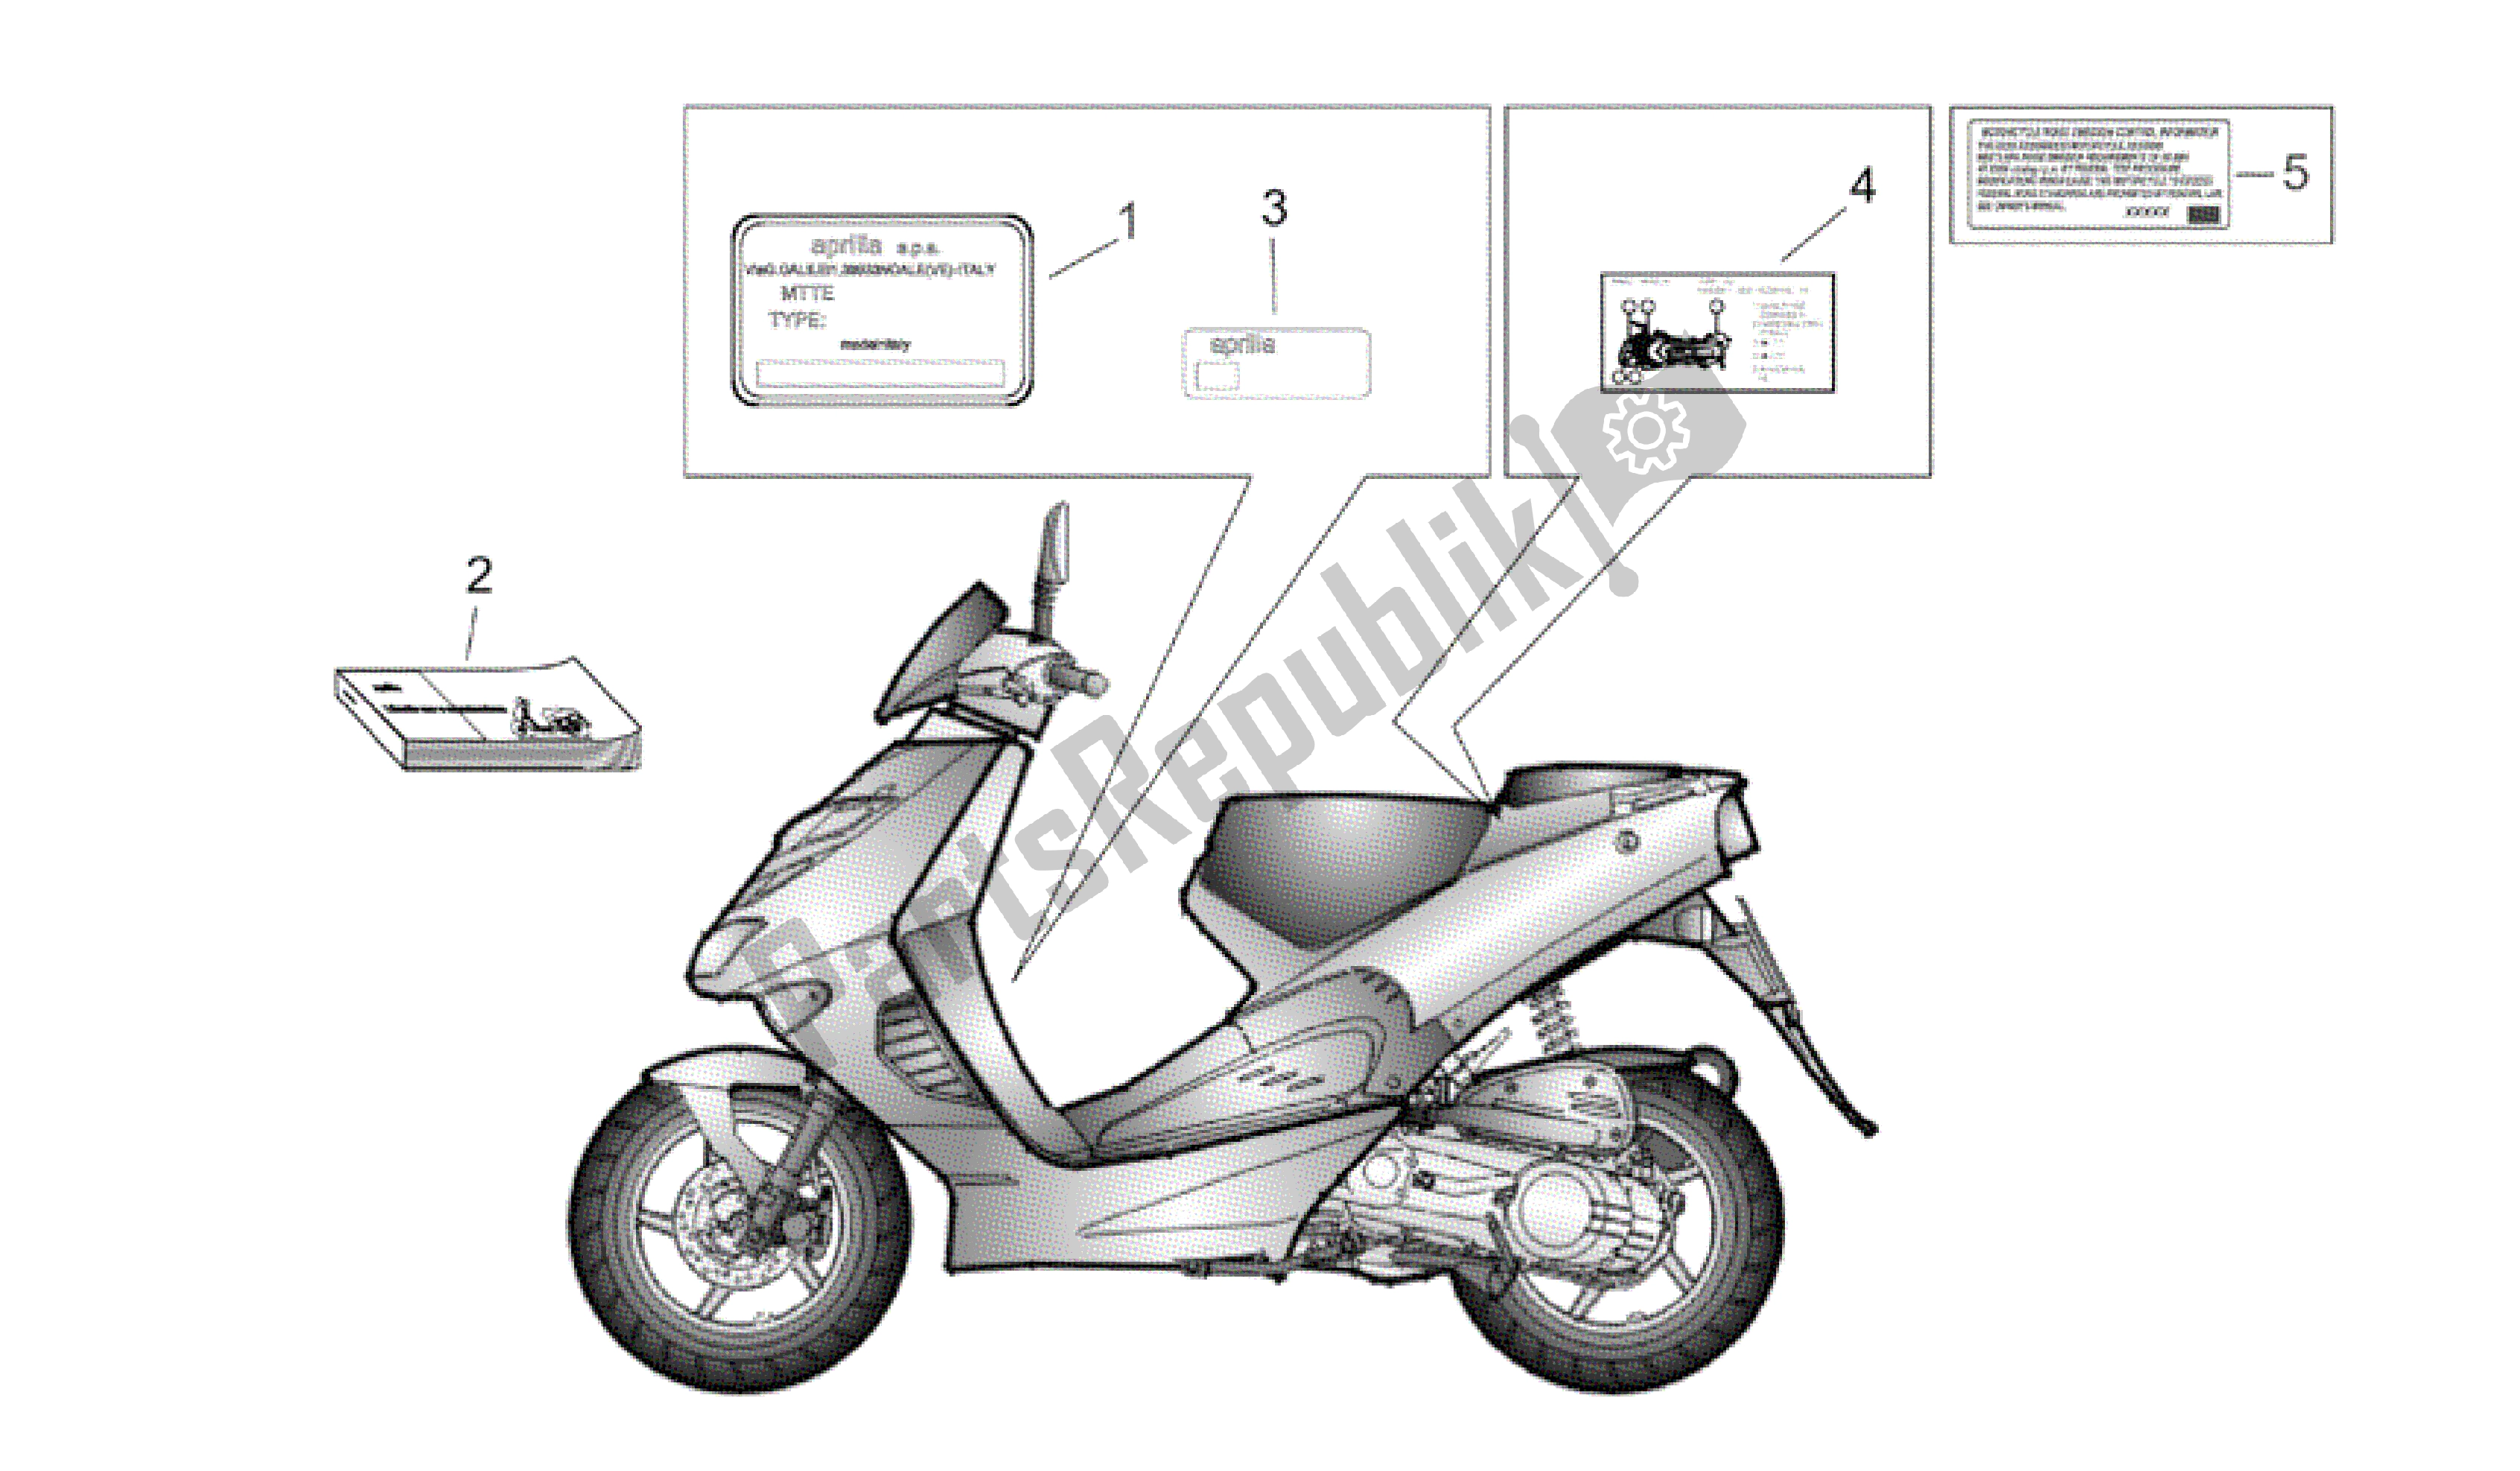 All parts for the Plate Set And Handbook of the Aprilia SR 50 2000 - 2004